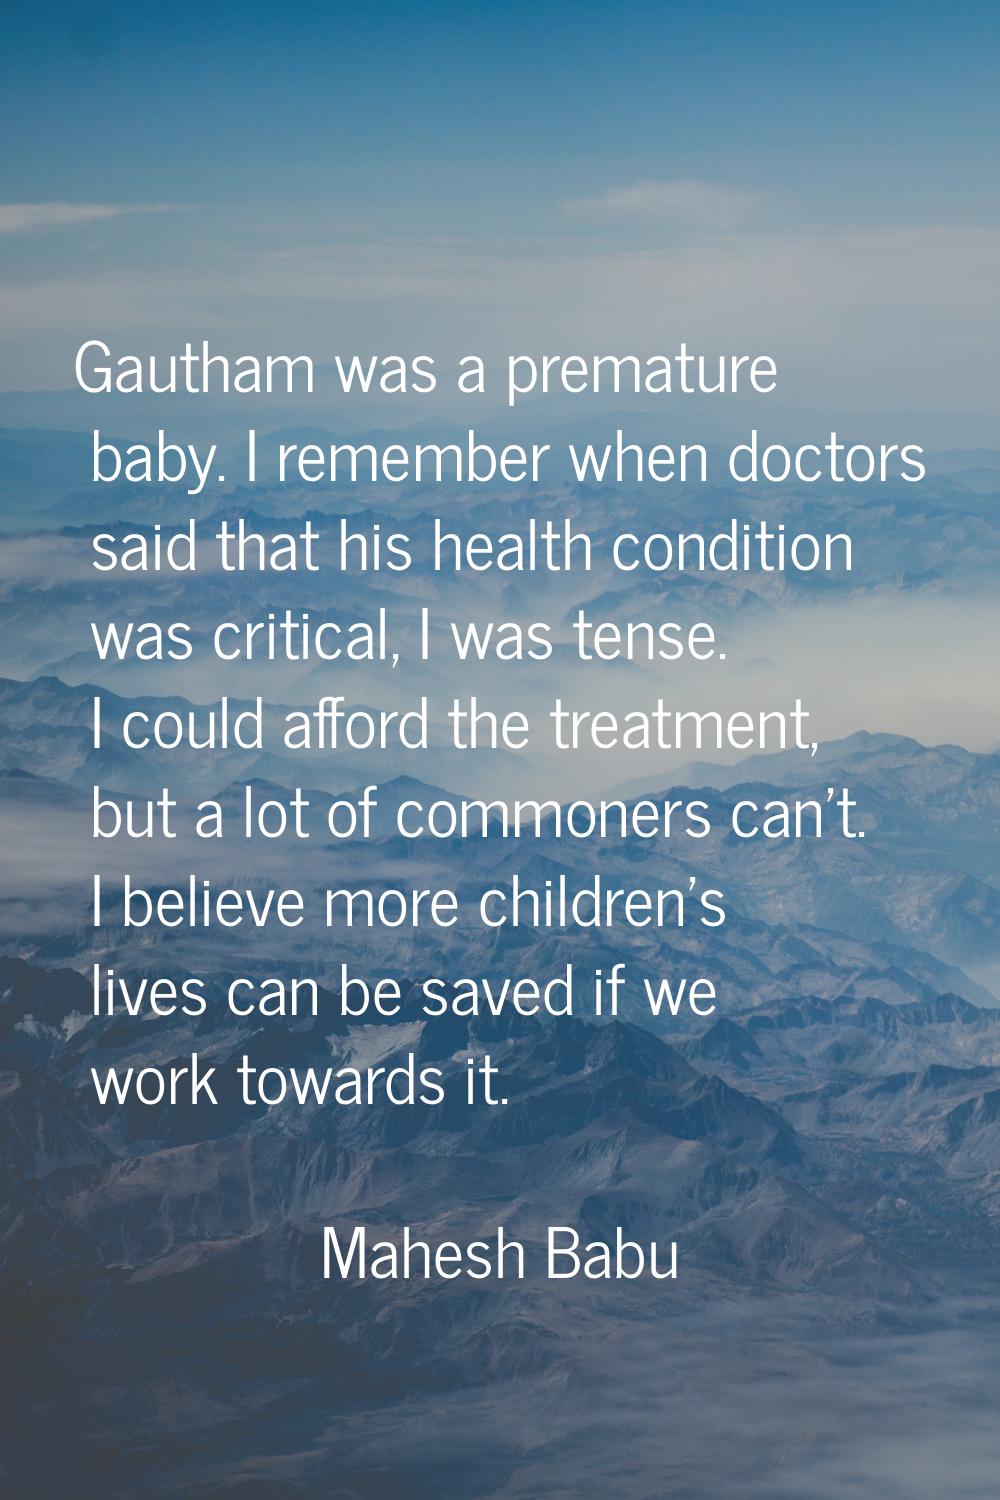 Gautham was a premature baby. I remember when doctors said that his health condition was critical, 